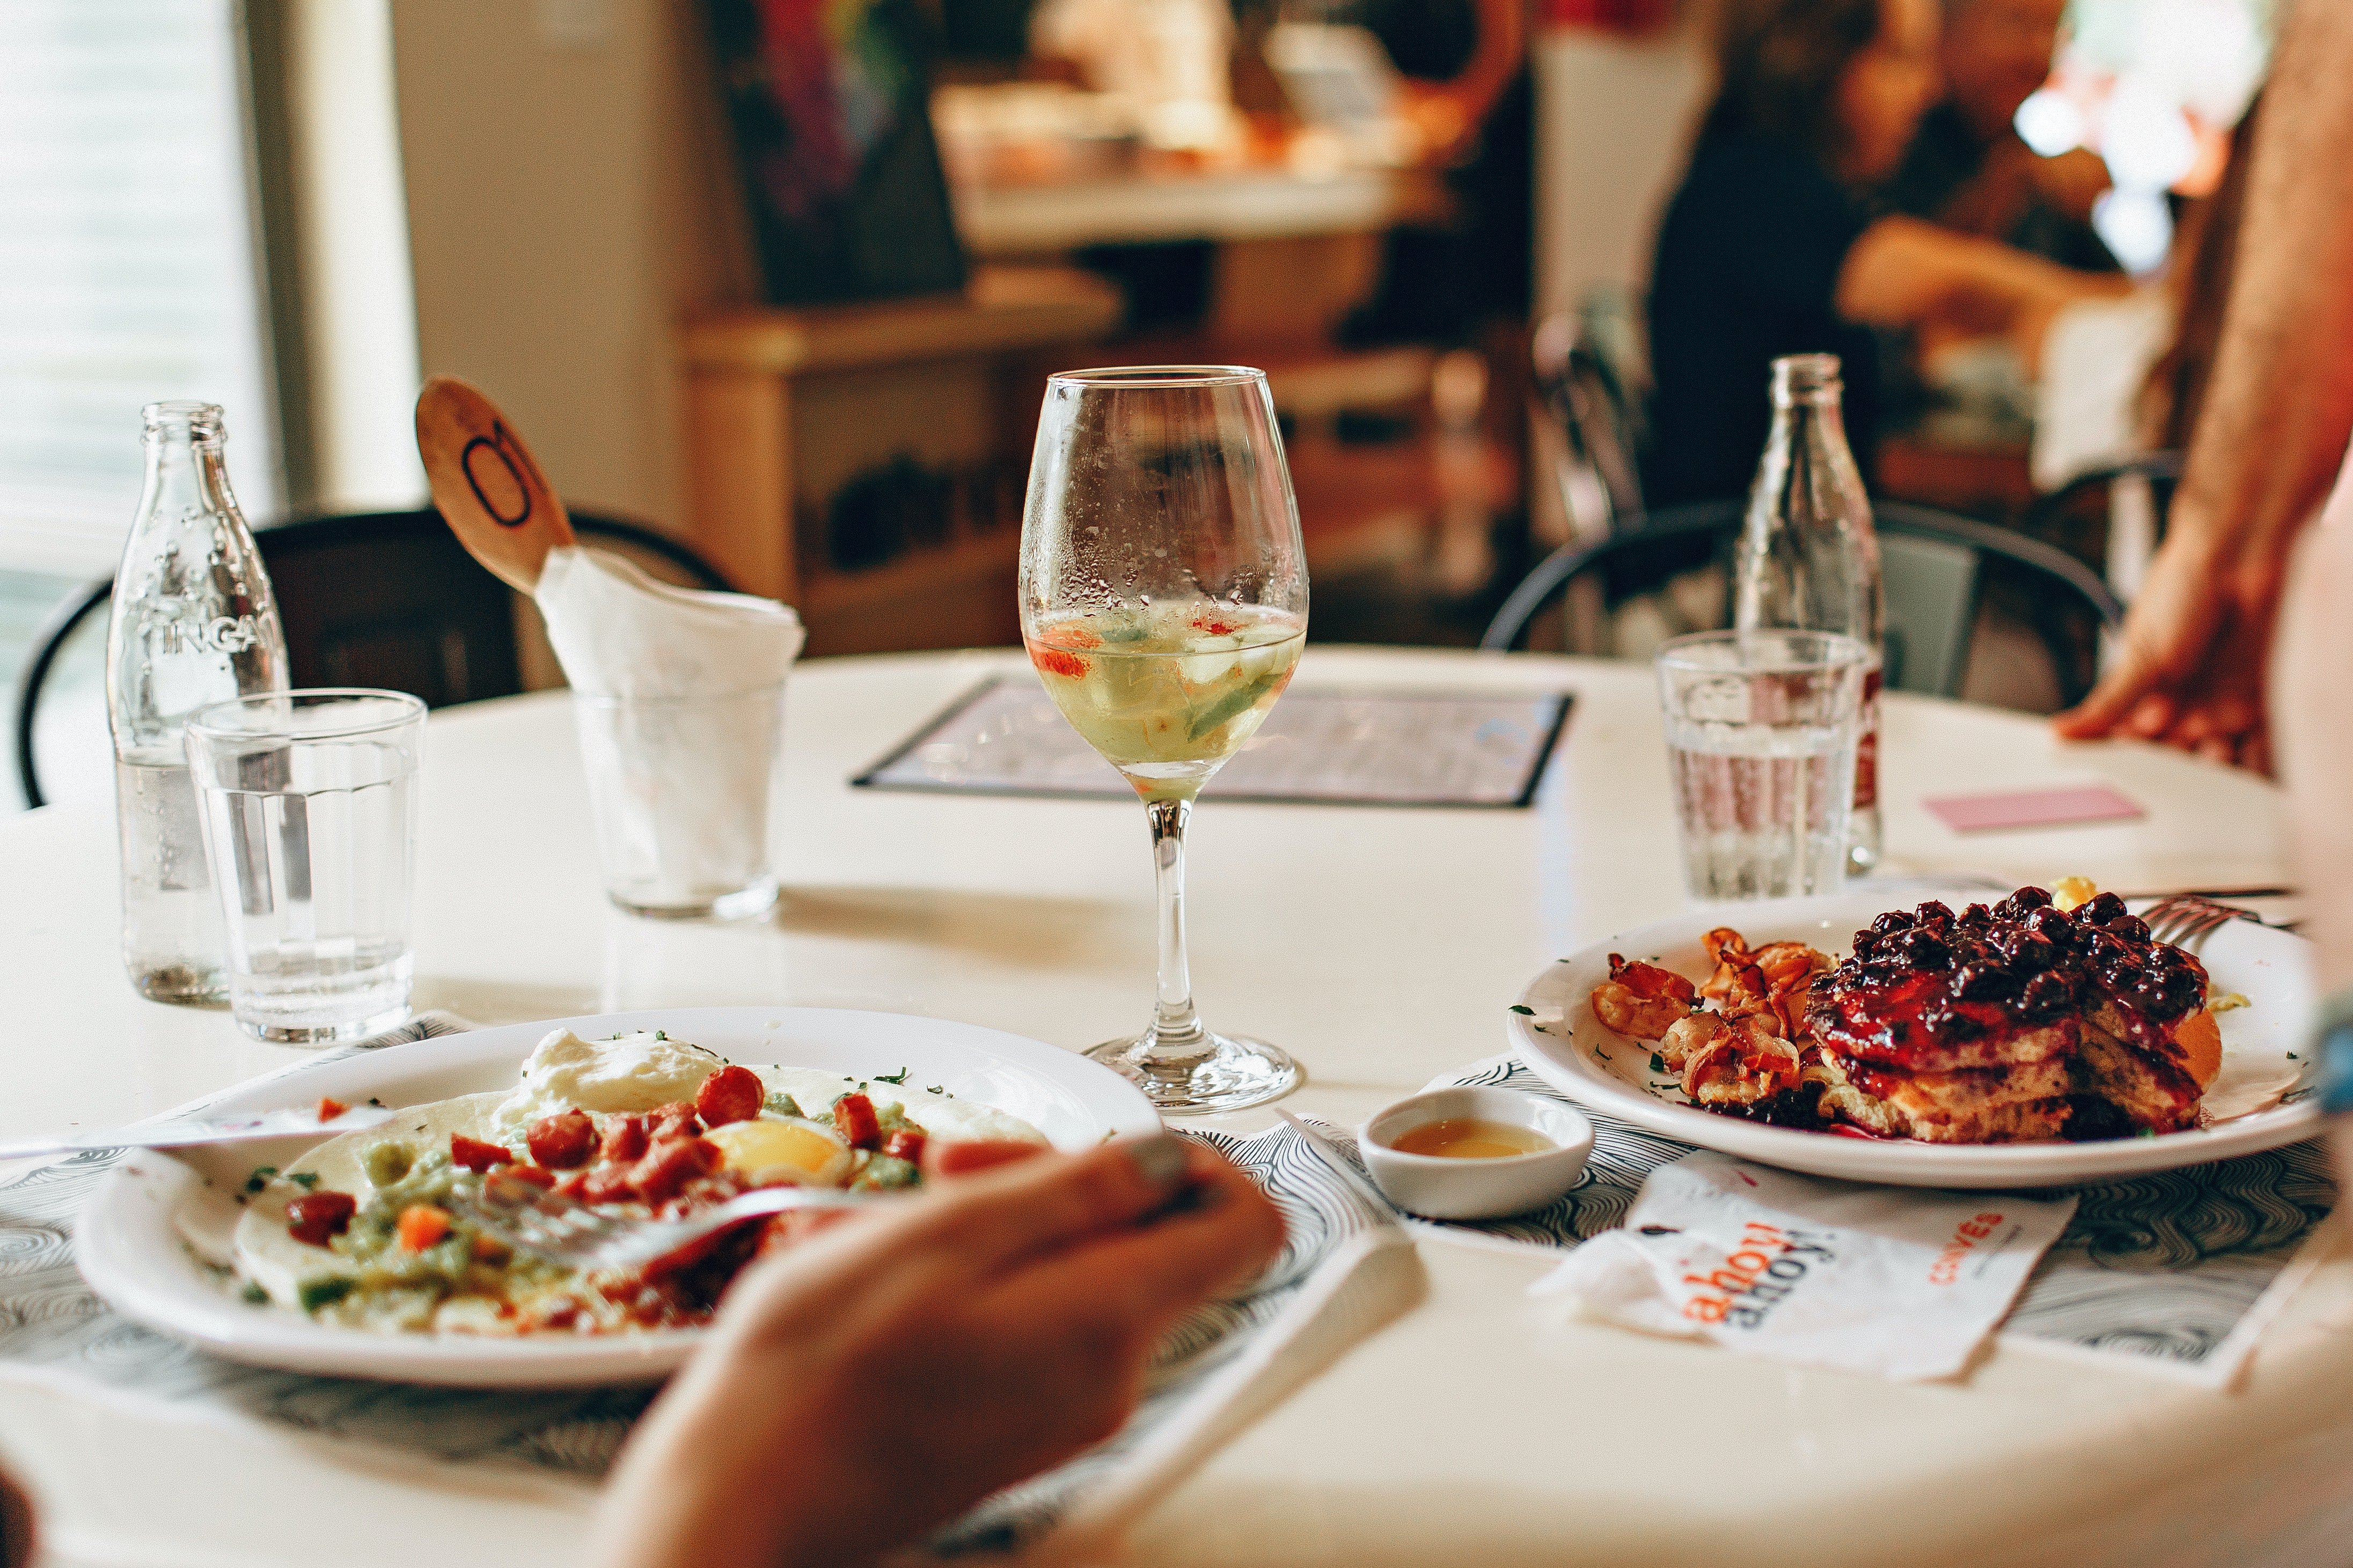 A table in a restaurant showing food served in plates. | Source: Pexels